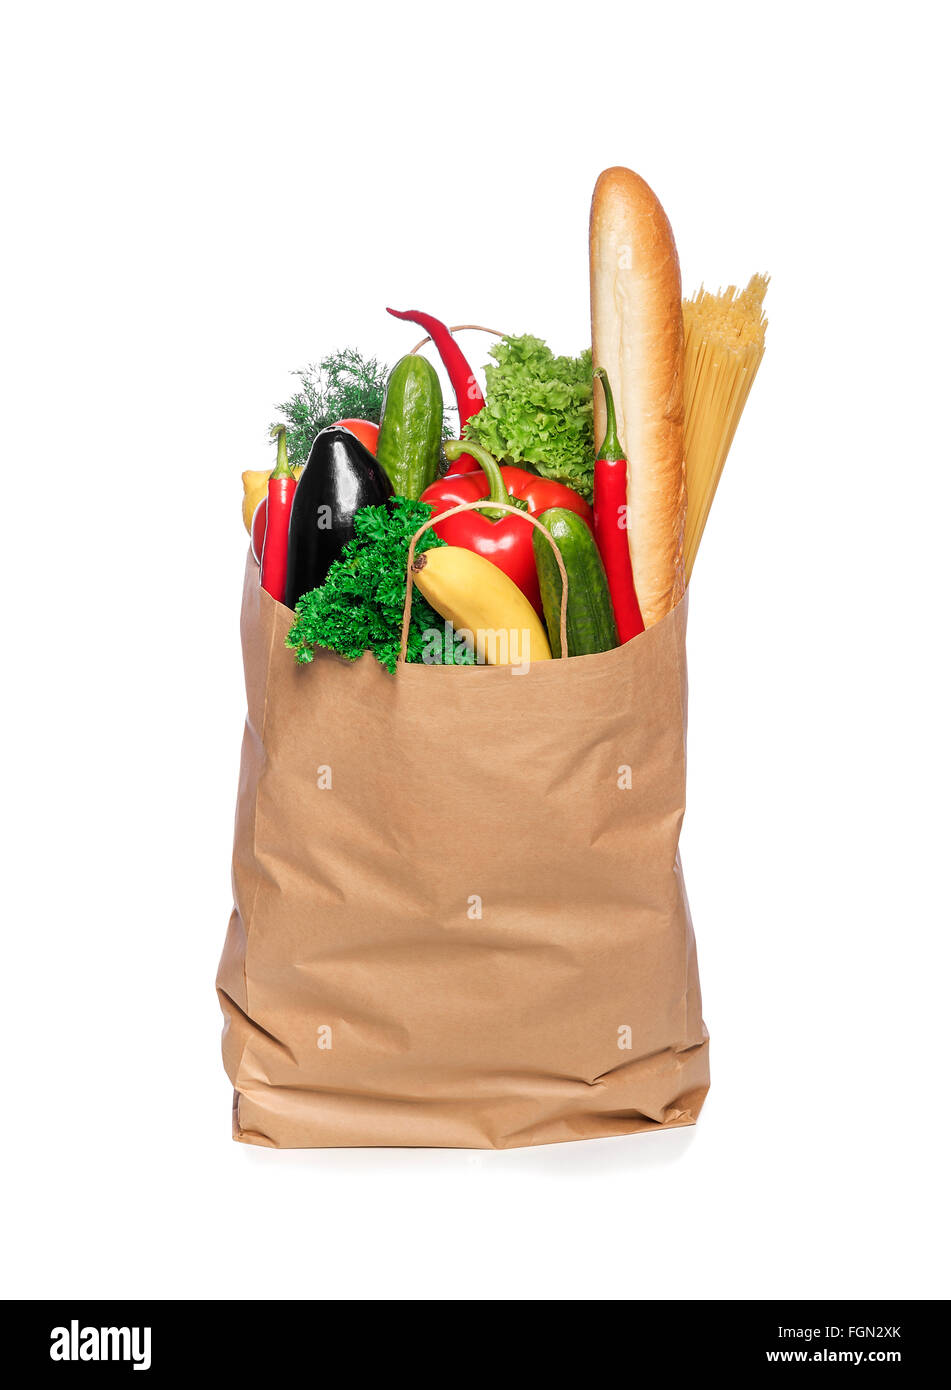 Paper bag with vegetables. Stock Photo